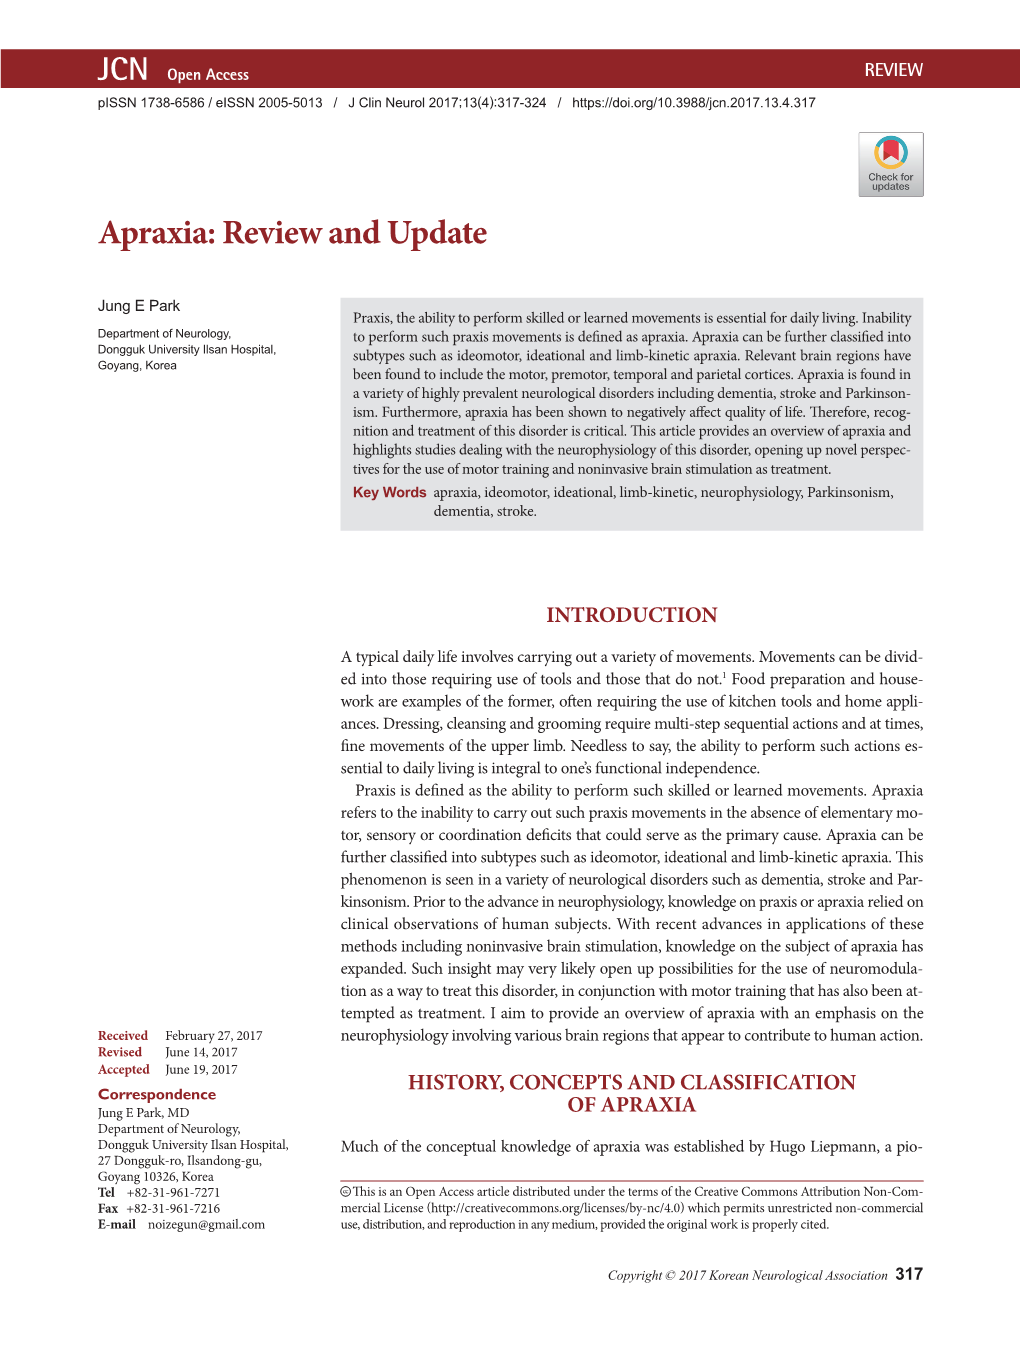 Apraxia: Review and Update